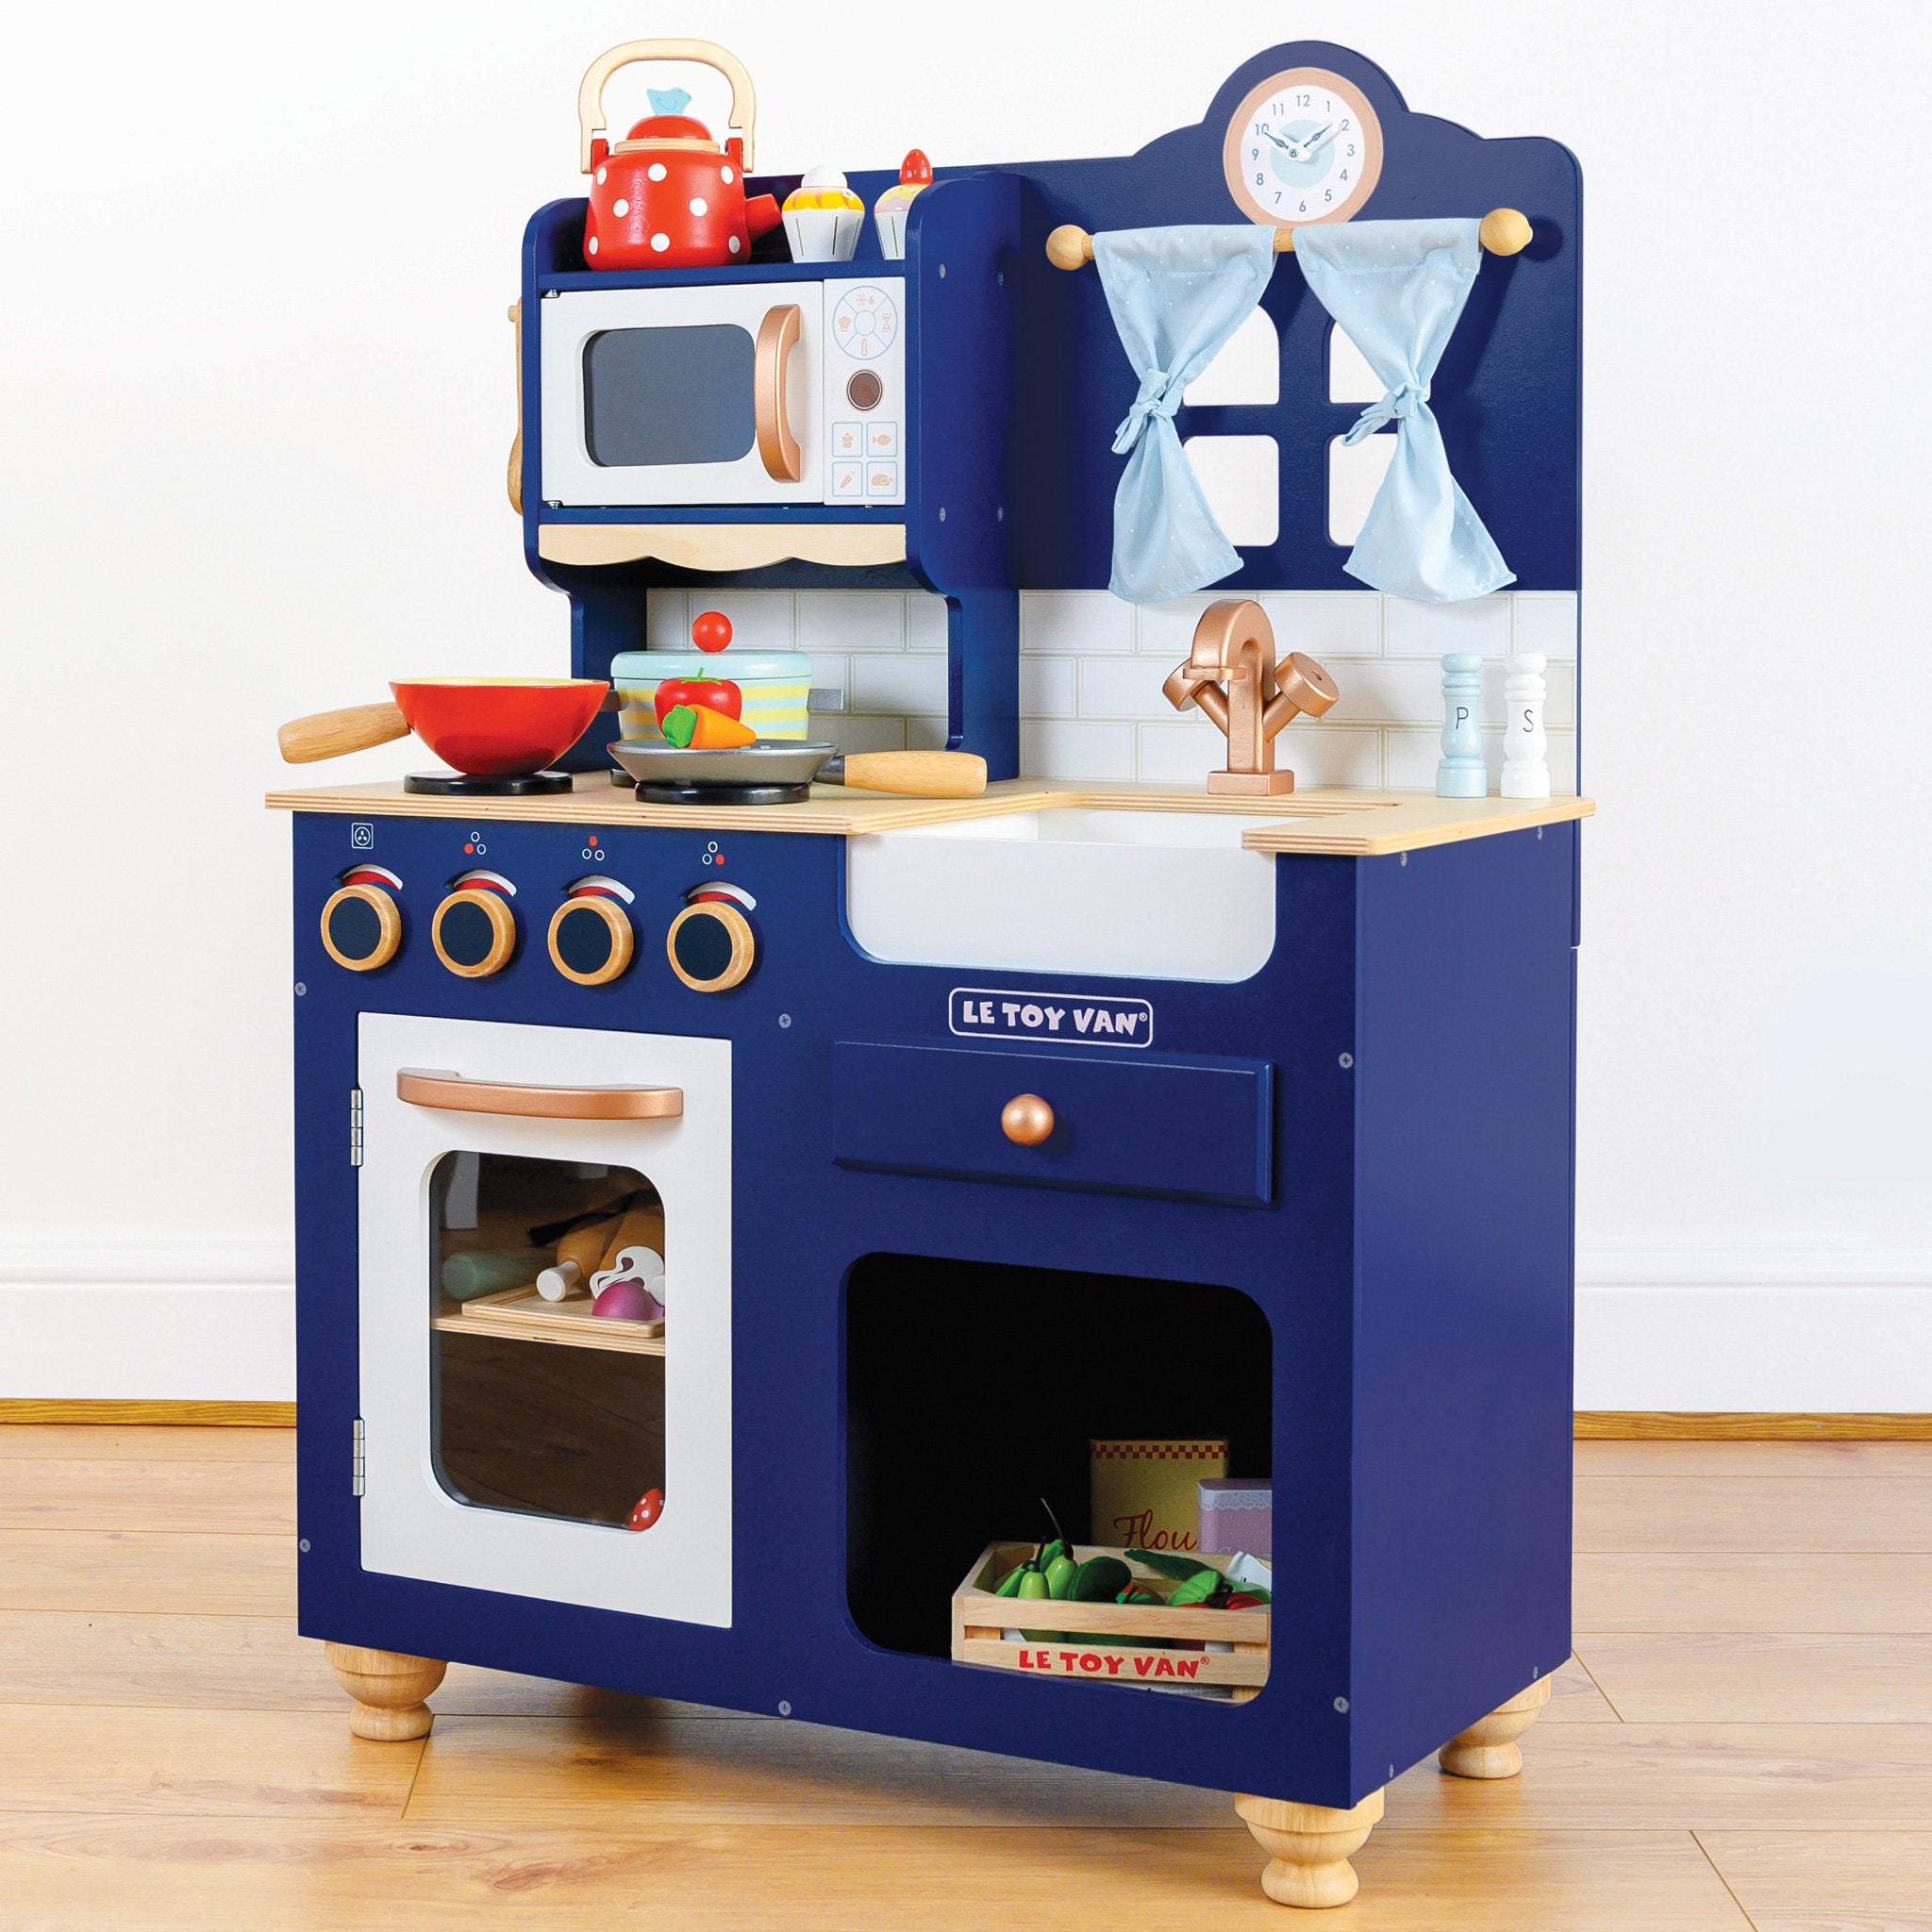 TV325-Oxford-Kitchen-Traditional-Country-Role-Play-Toy.jpg